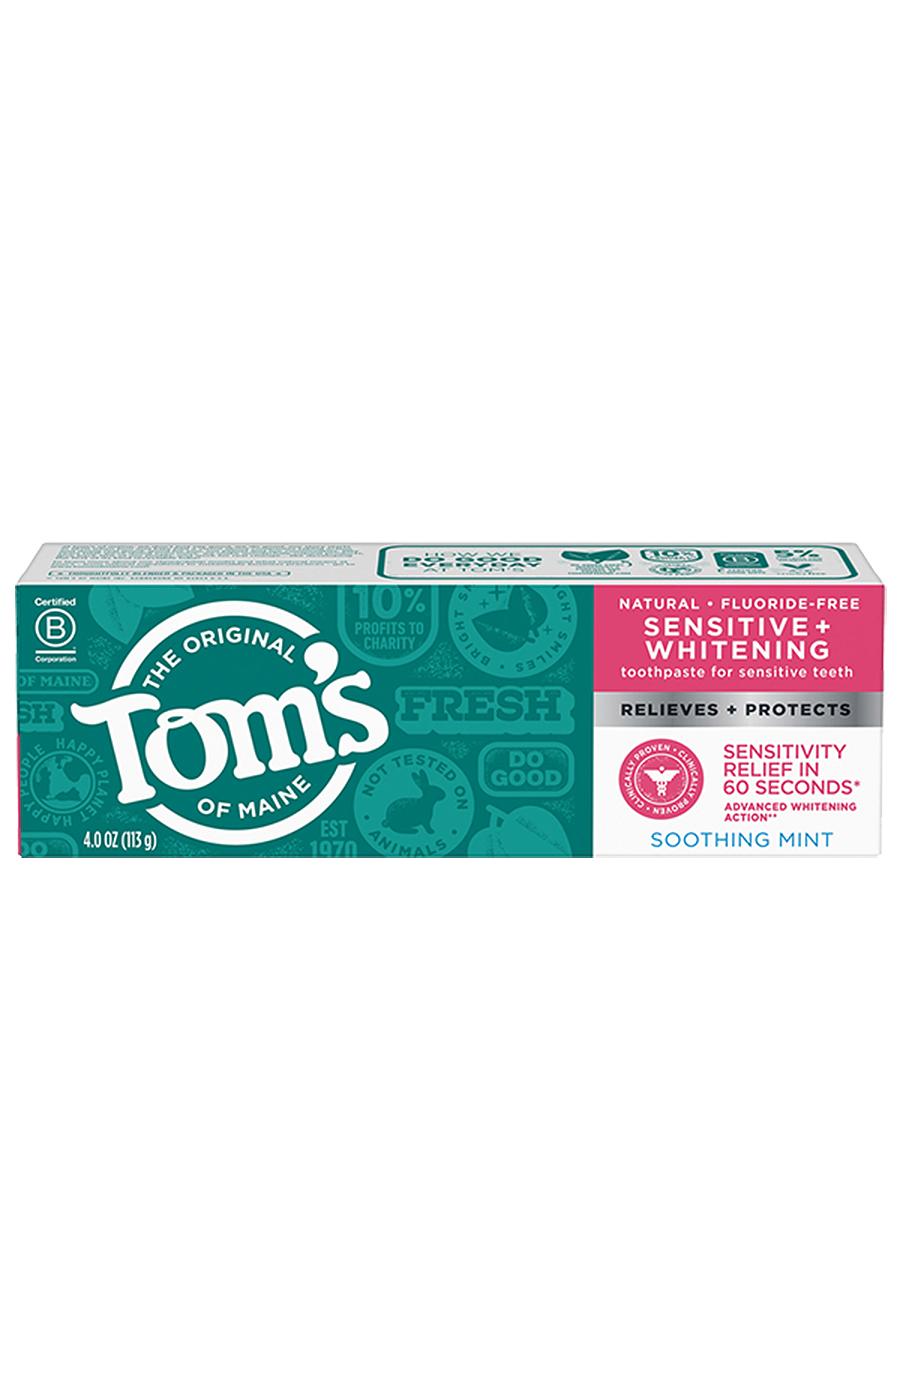 Tom's of Maine Sensitive + Whitening Toothpaste - Soothing Mint; image 1 of 9